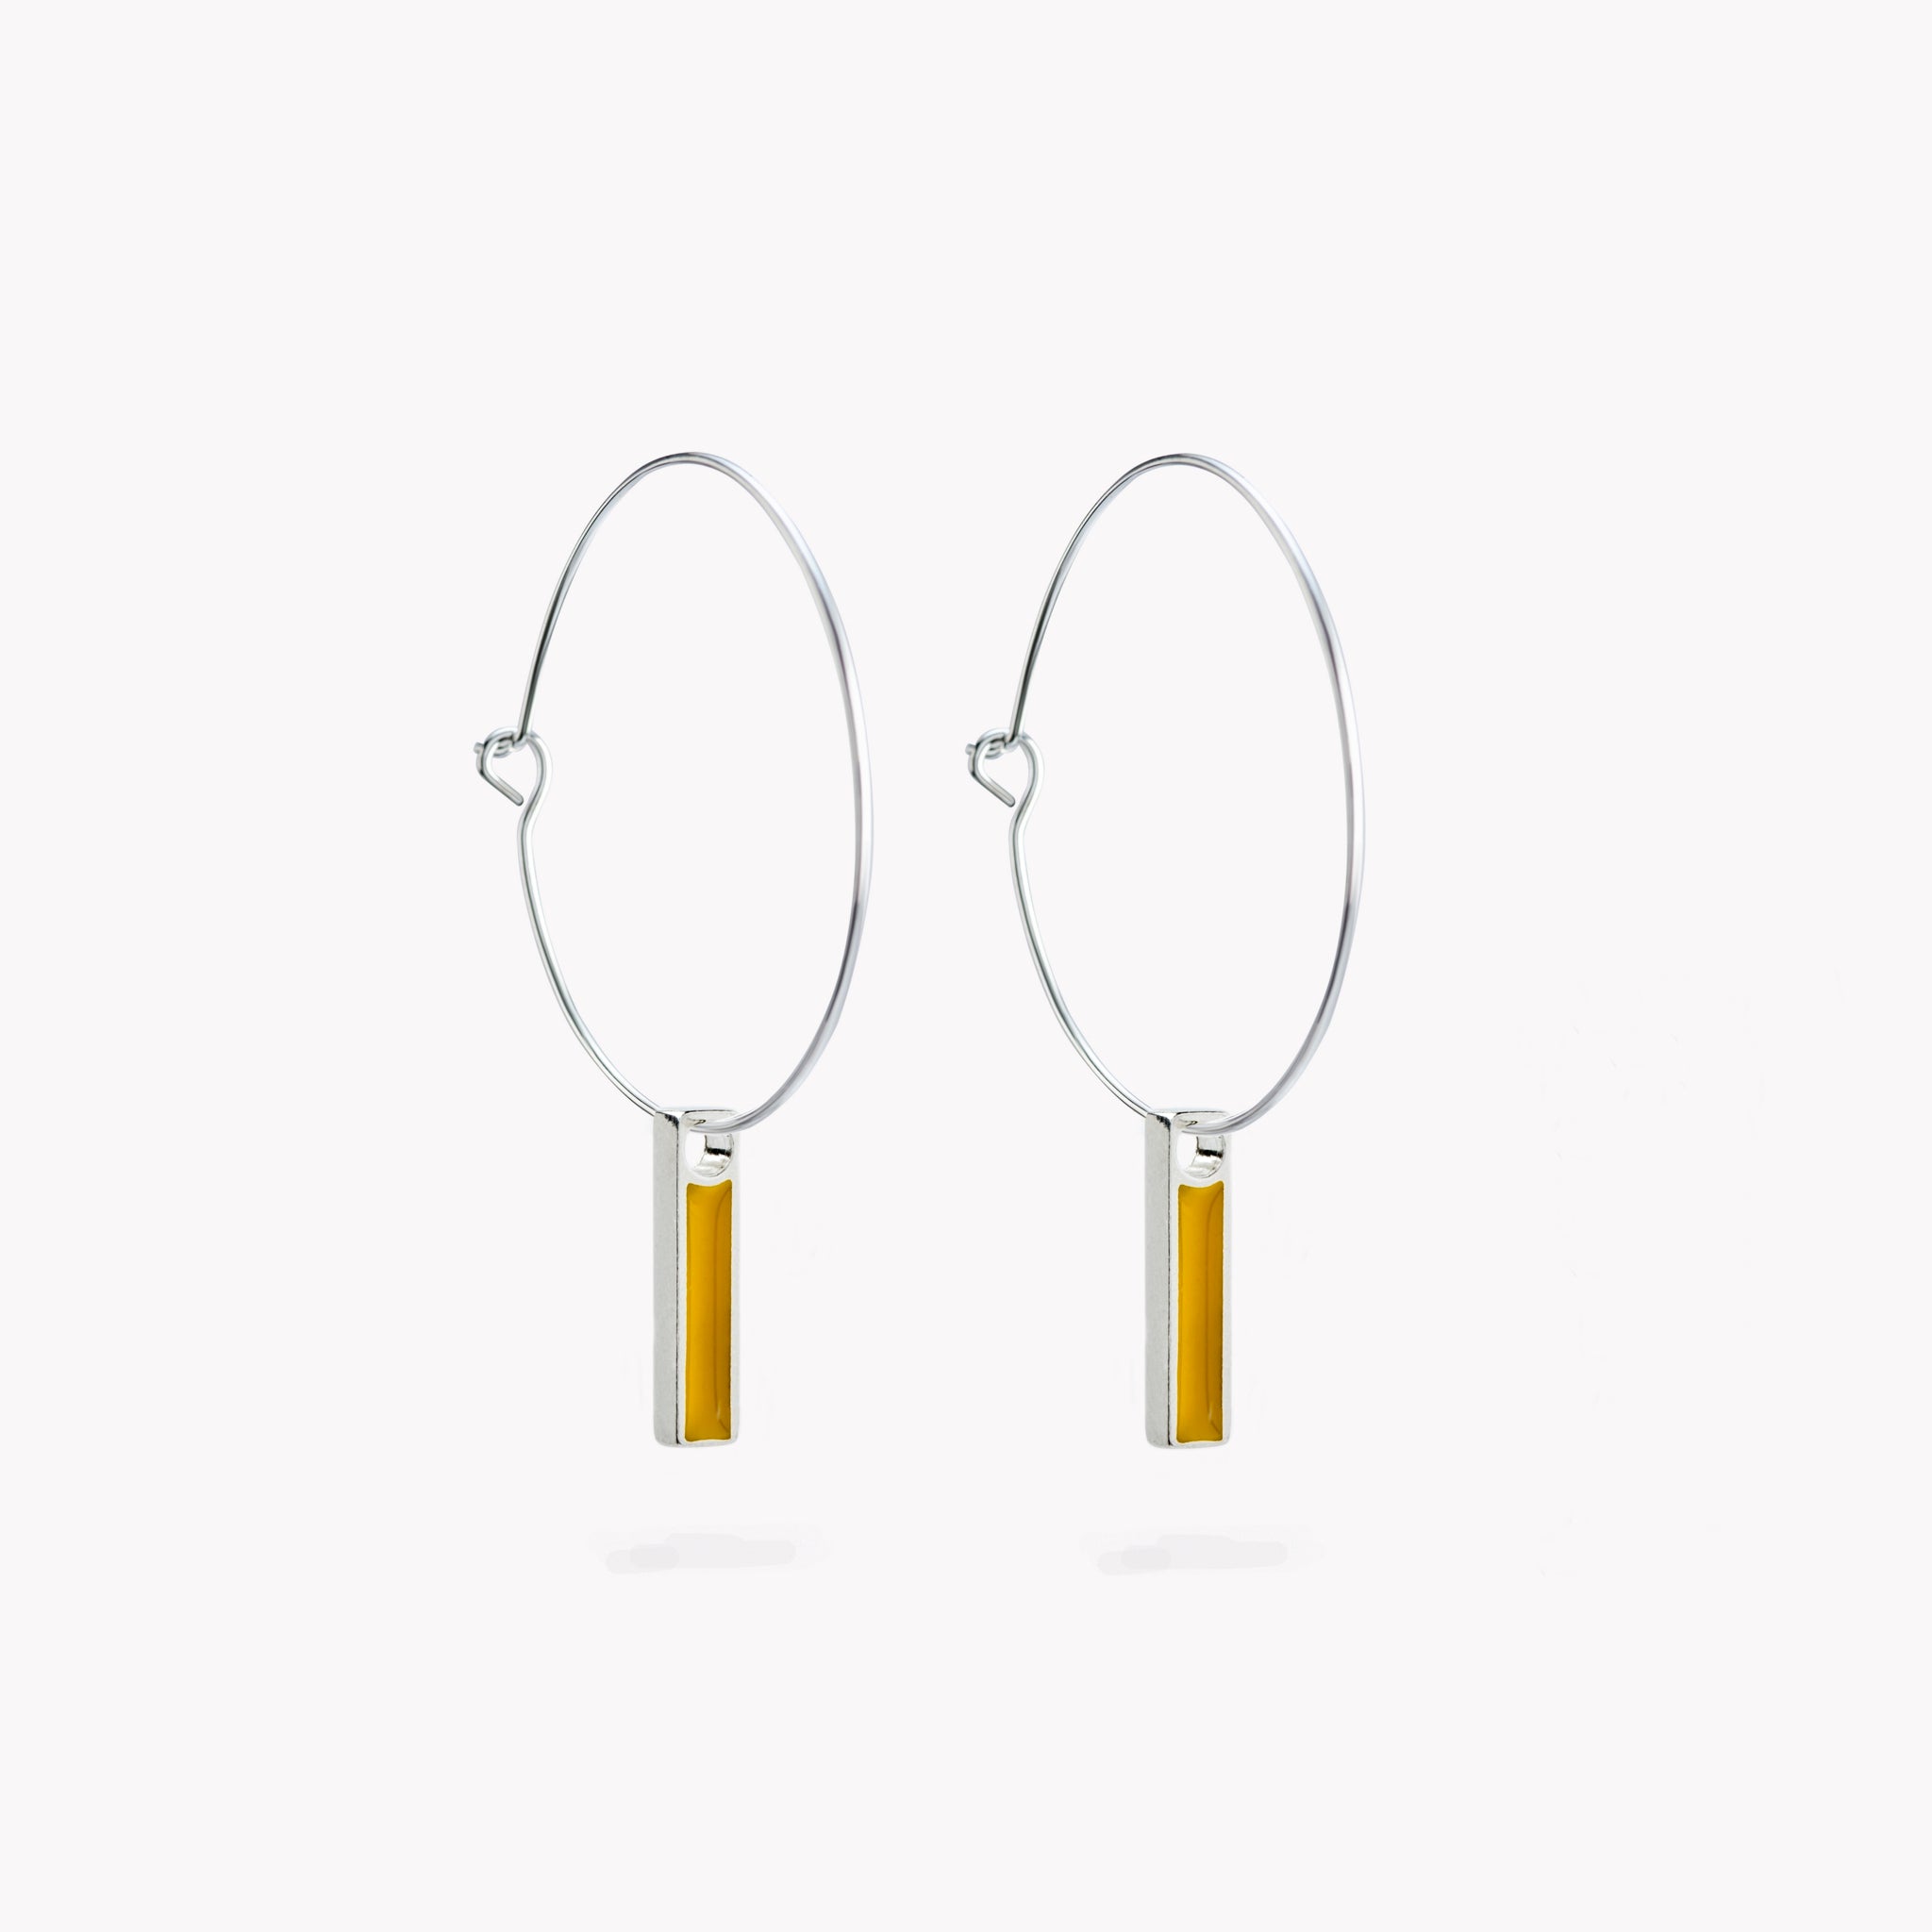 A pair of simple hoop earrings with a hanging yellow bar.